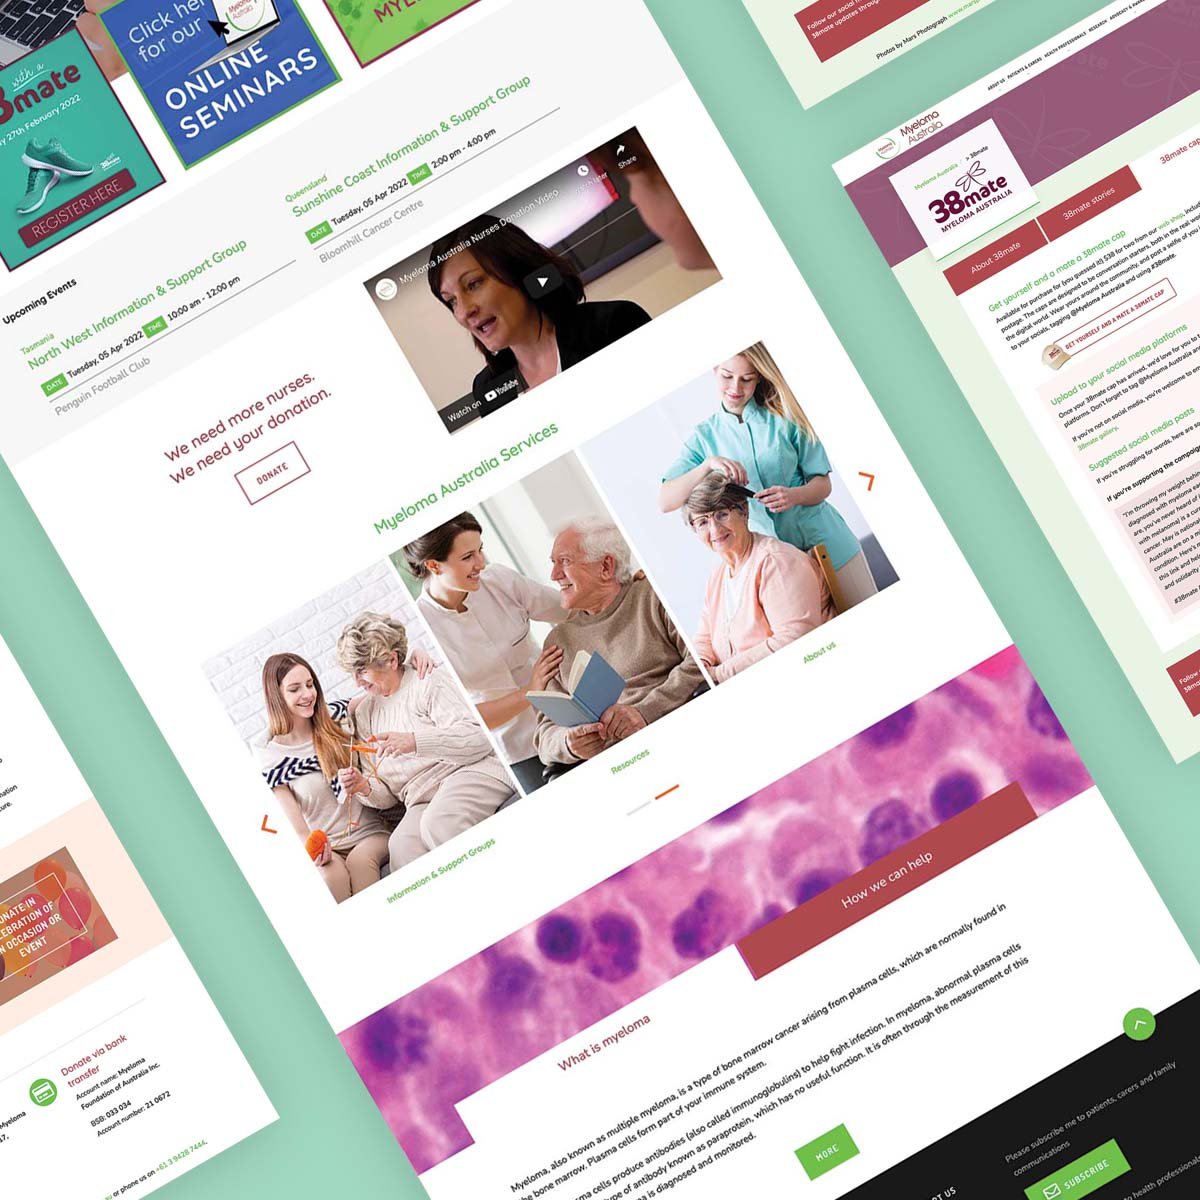 Myeloma Australia website pages at a 45 degree angle on acolourful background